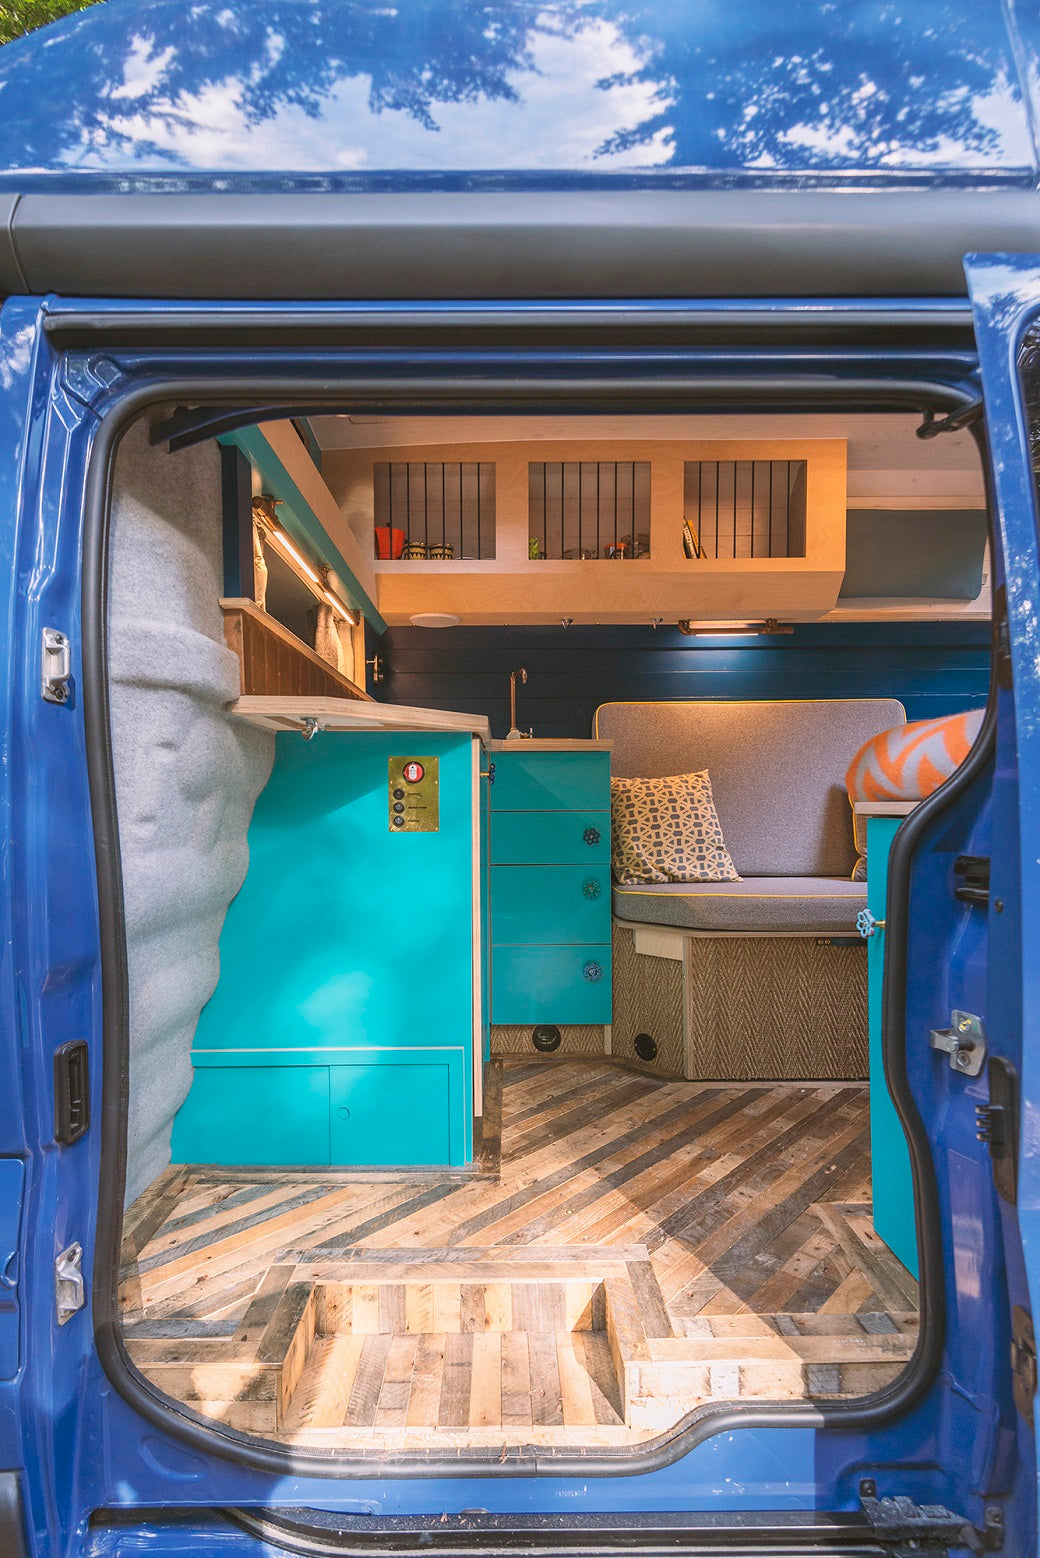 Sell or hire out your campervan?